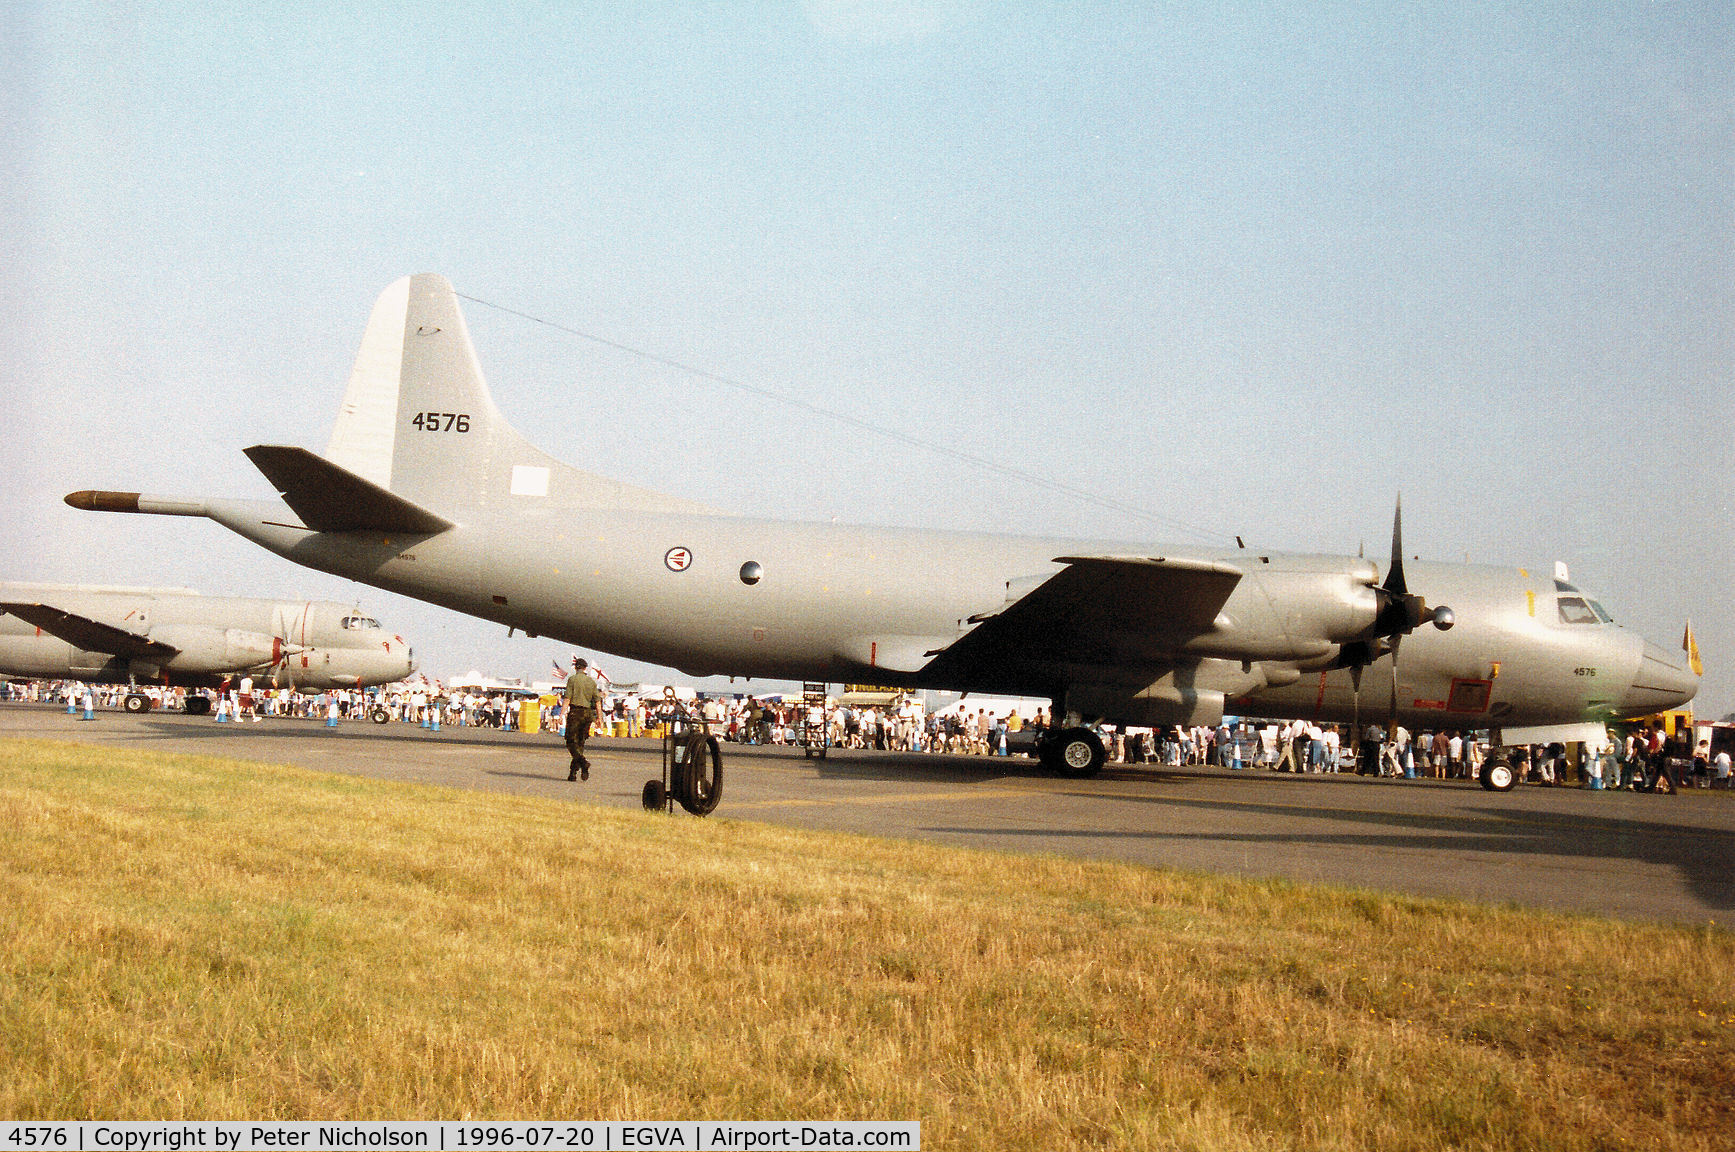 4576, Lockheed P-3N Orion C/N 185-5257, P-3N Orion of 333 Skv Royal Norwegian Air Force on display at the 1996 Royal Intnl Air Tattoo at RAF Fairford.